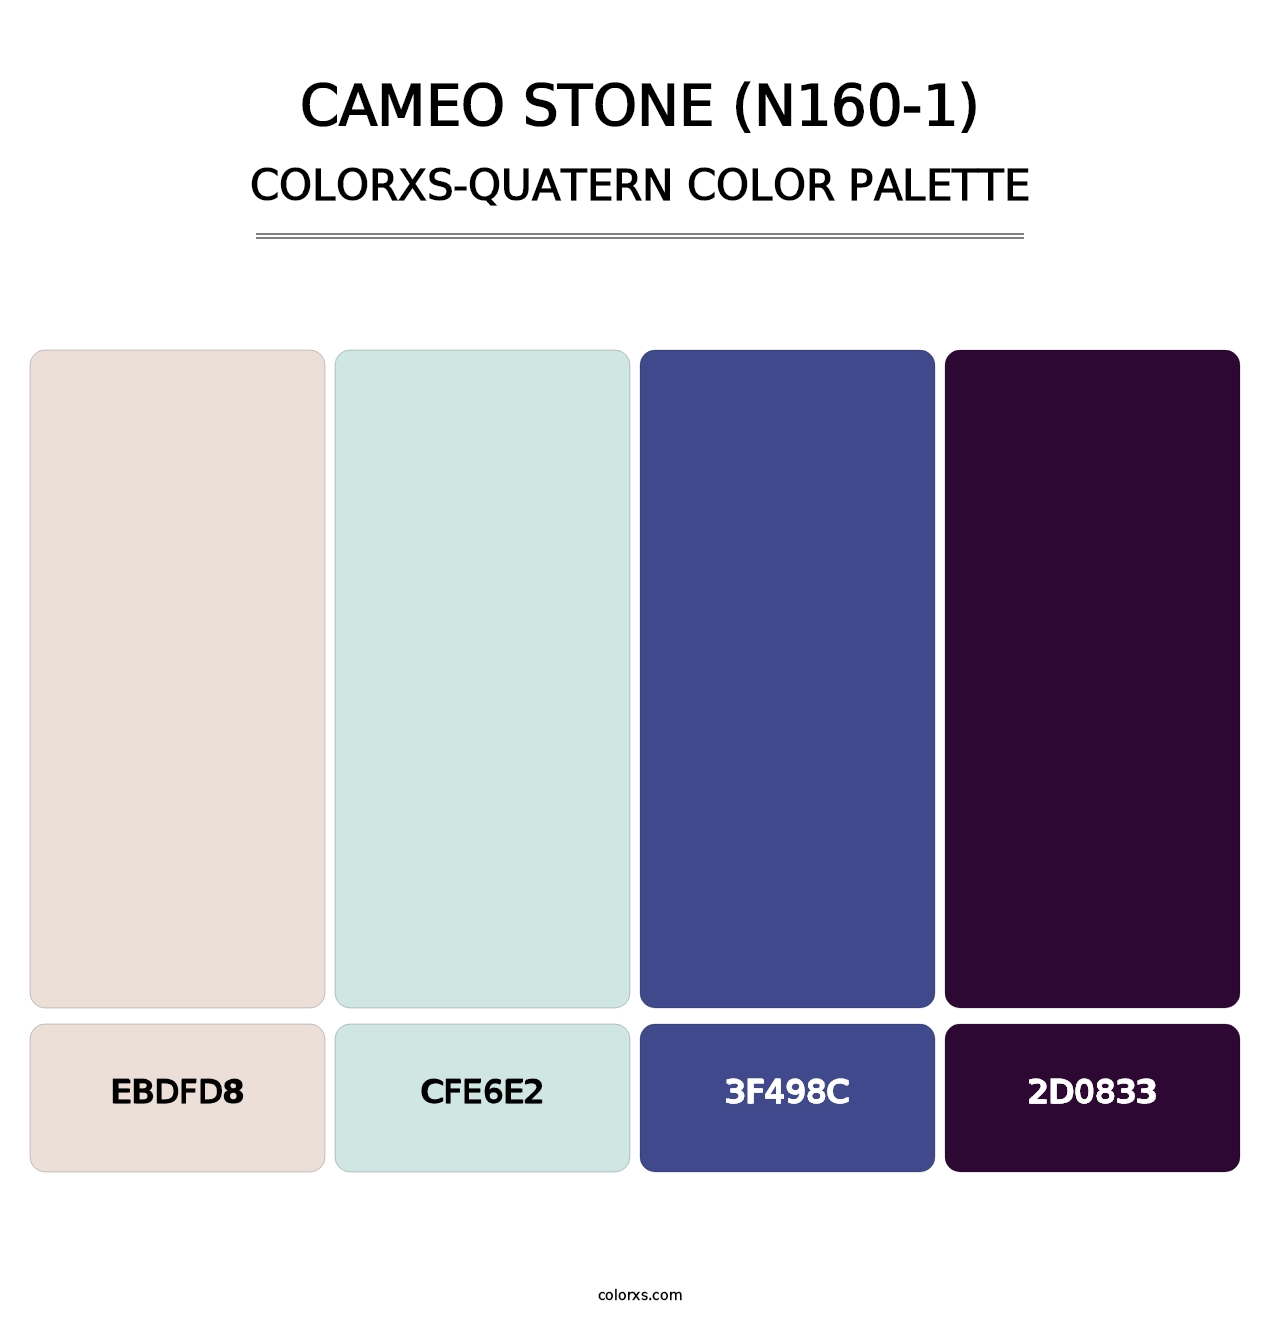 Cameo Stone (N160-1) - Colorxs Quatern Palette